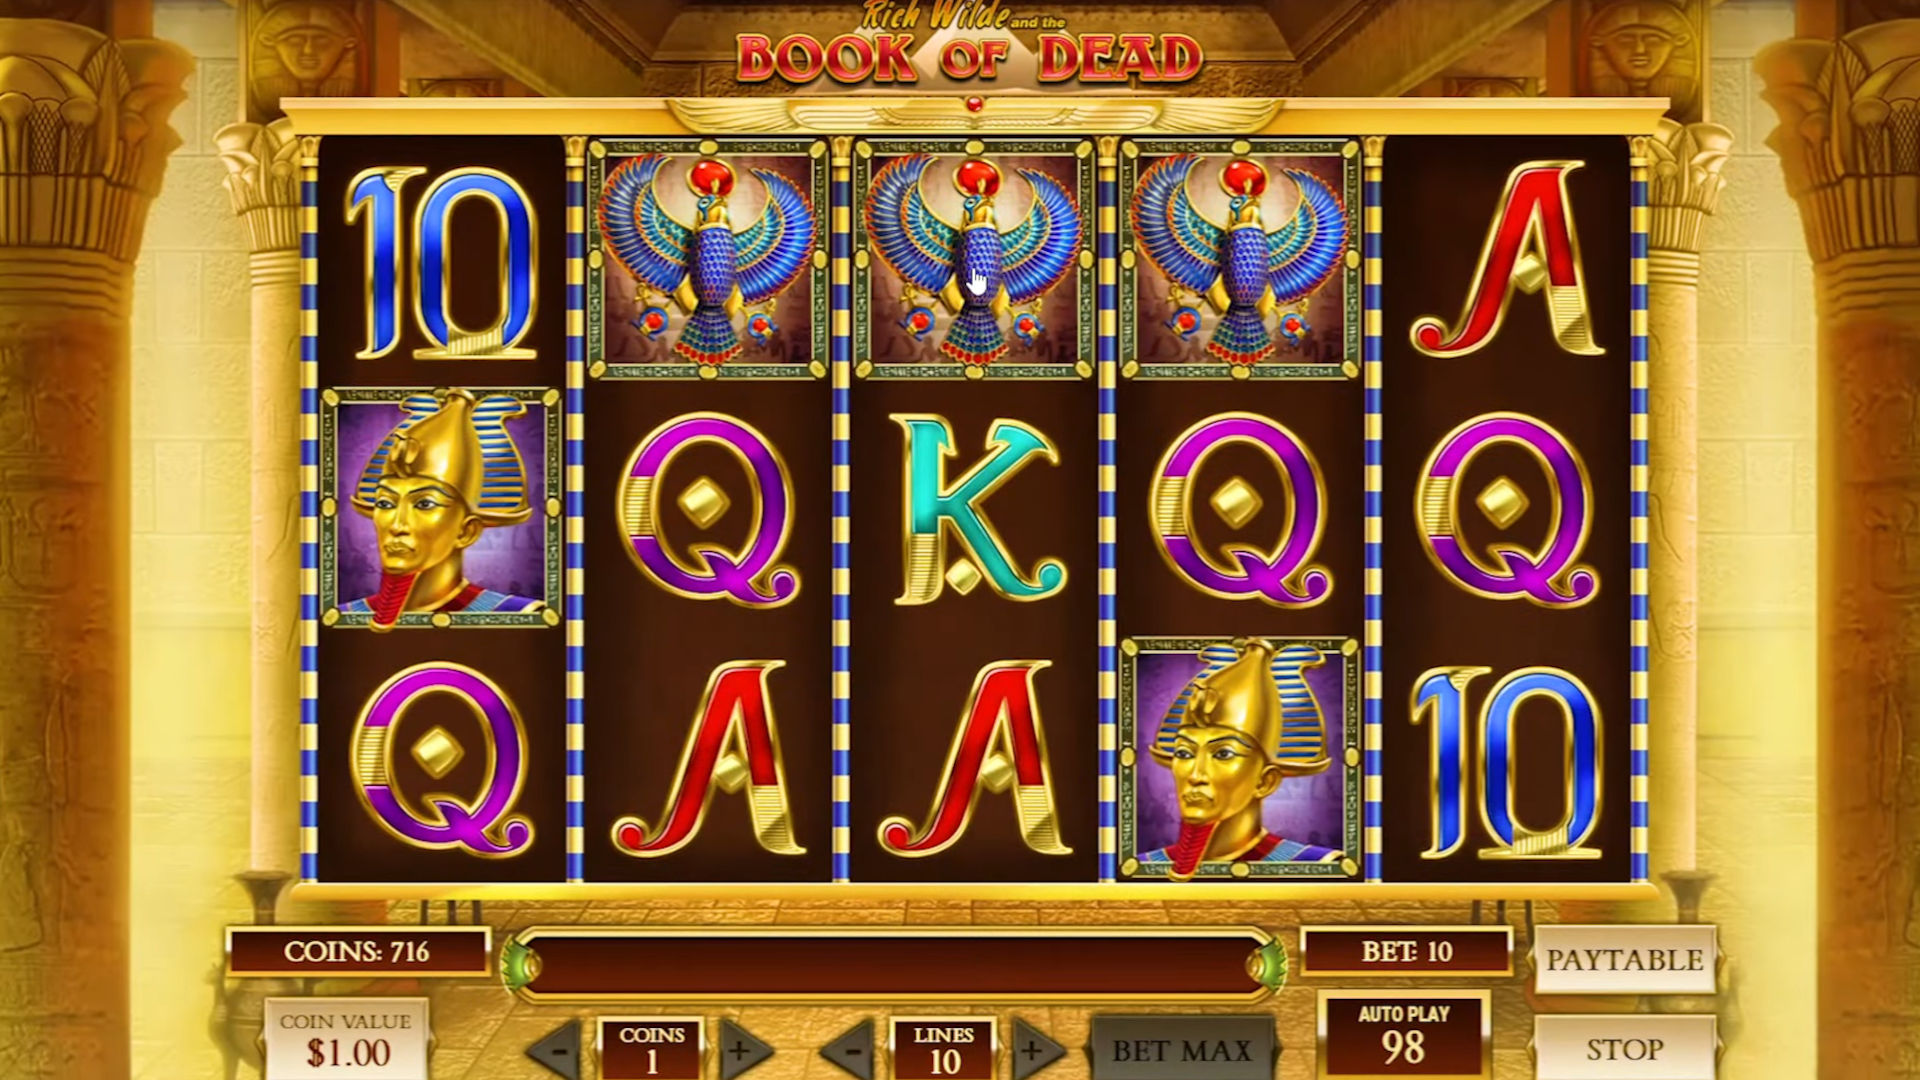 Play and earn: is it realistic to make a stable profit in the Book of Dead slot